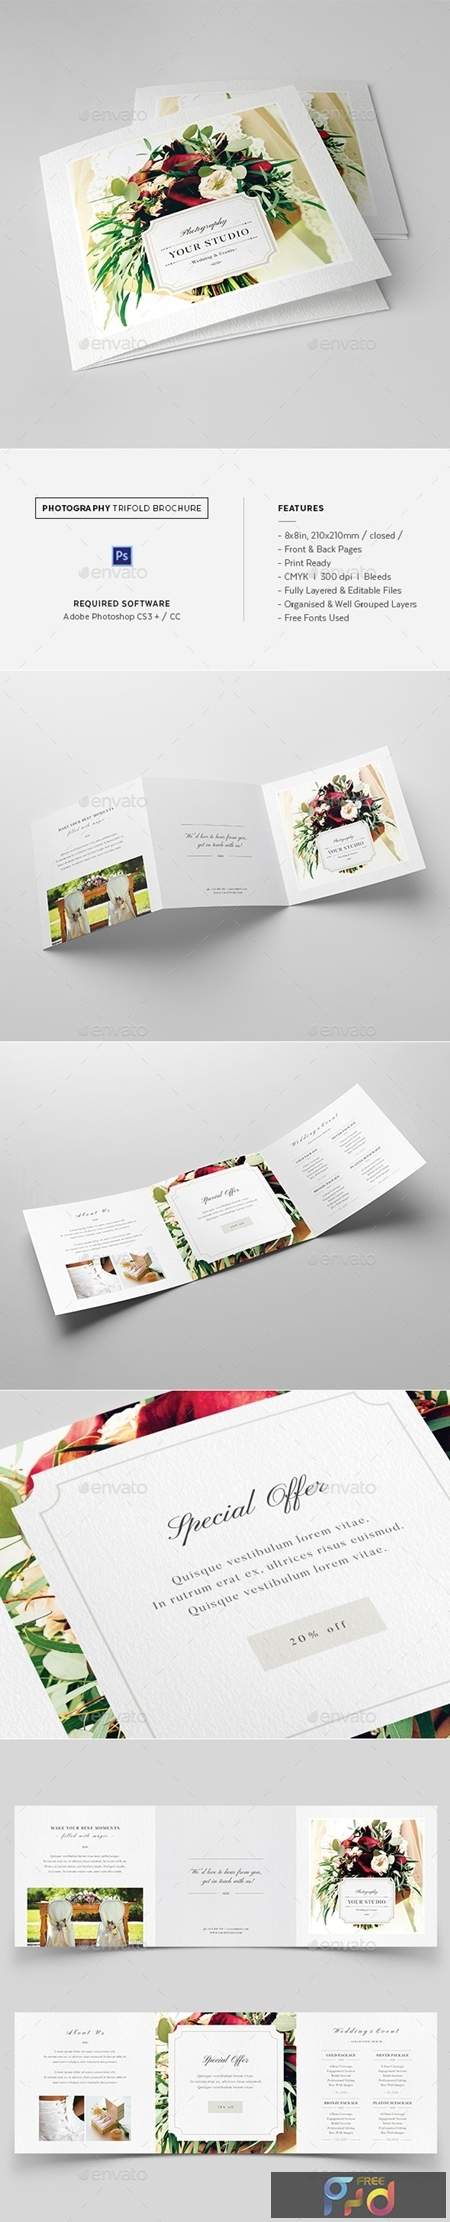 FreePsdVn.com 1906542 TEMPLATE photography square trifold brochure template 23456334